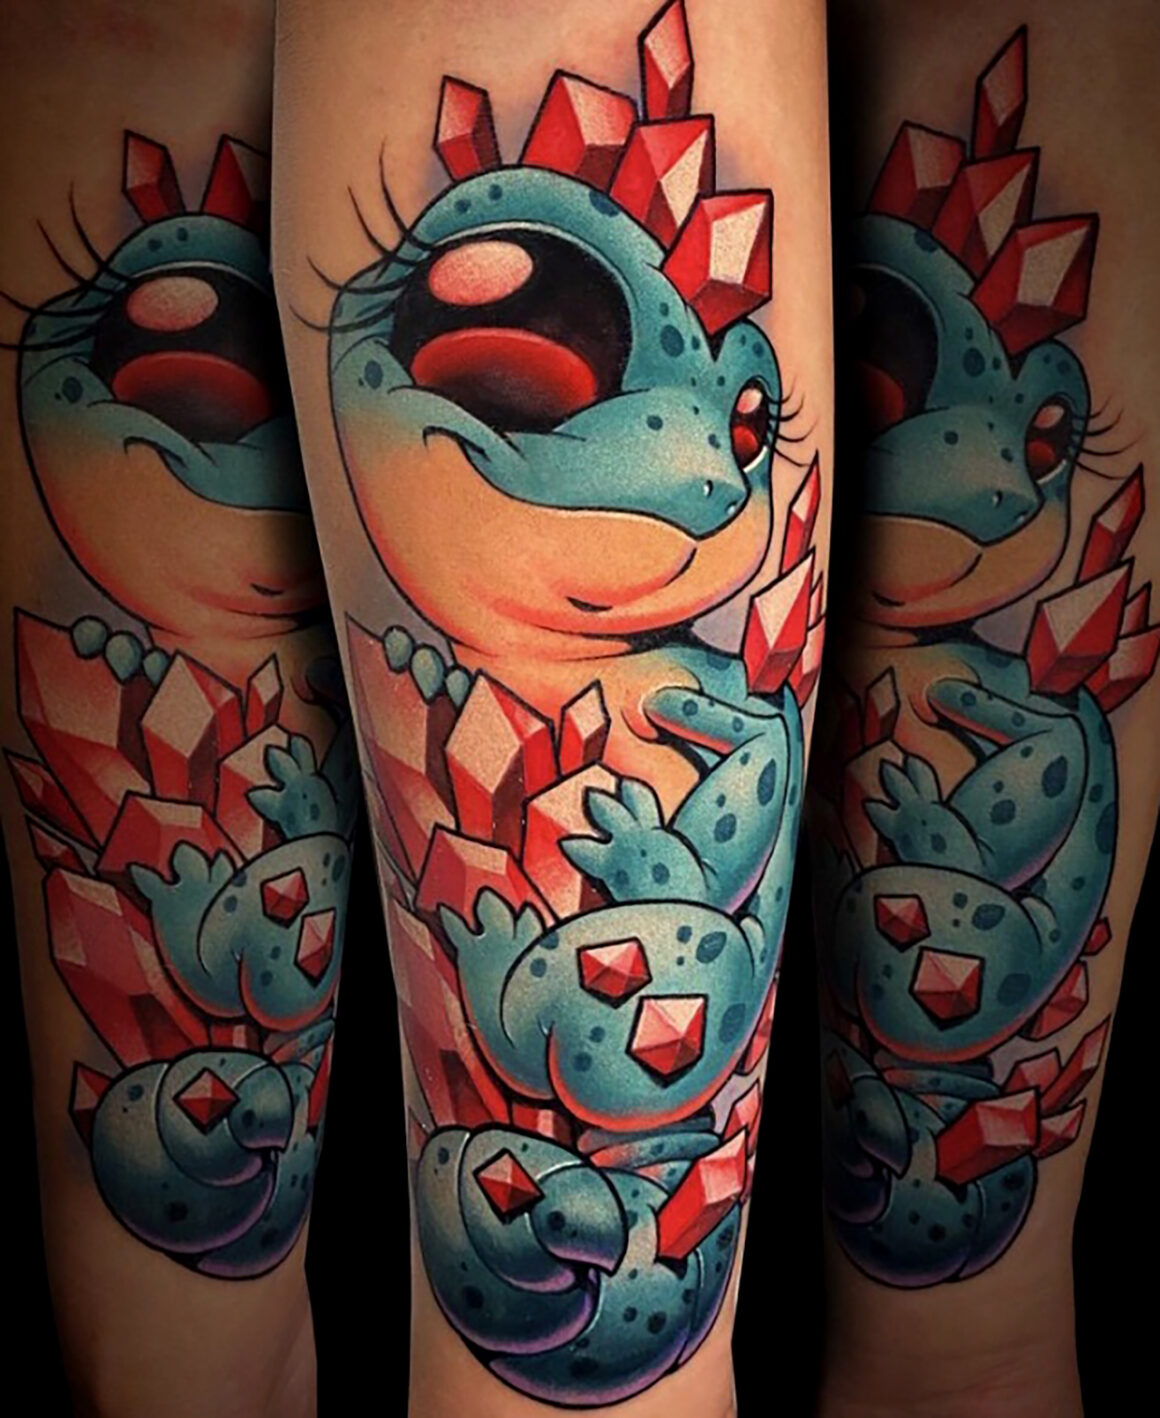 Tattoo by Paolo Gnocchi, @paolotattoo